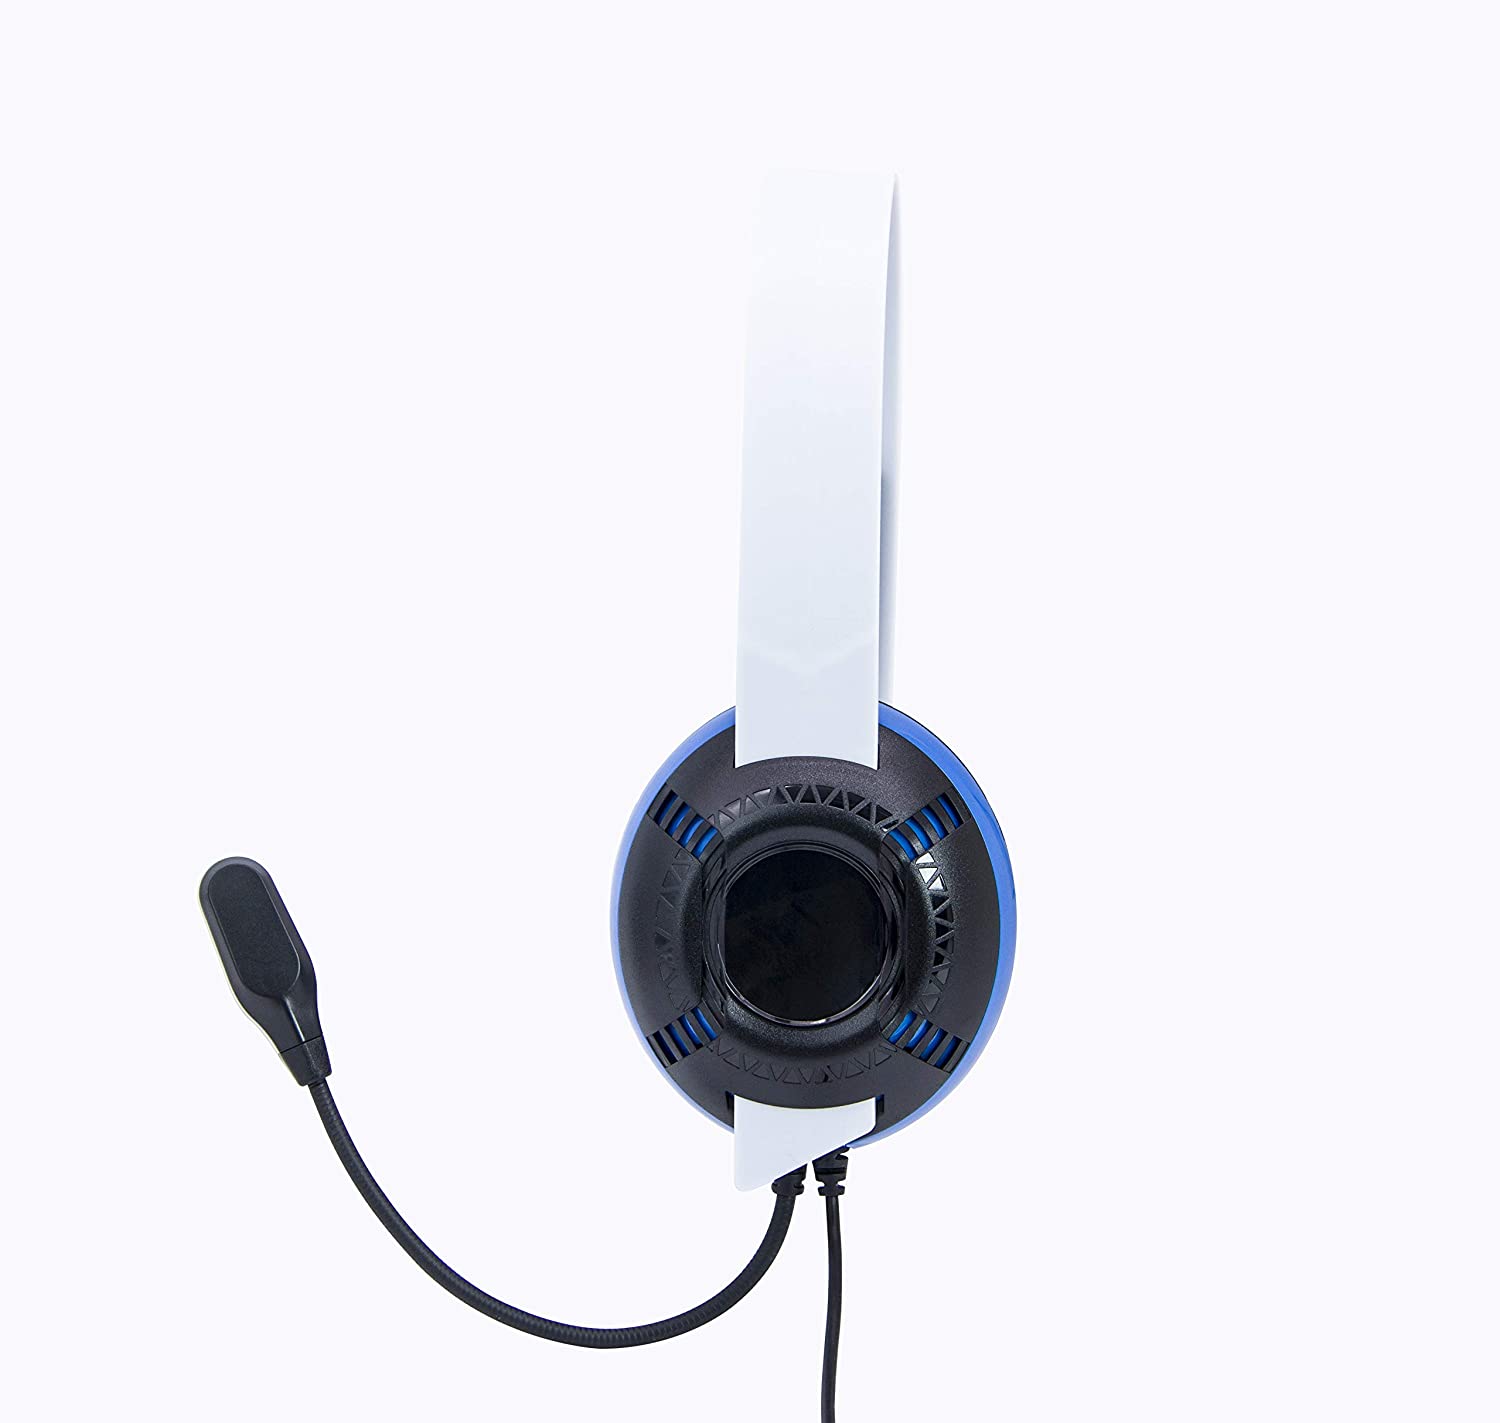 Ps5 Chat Headset